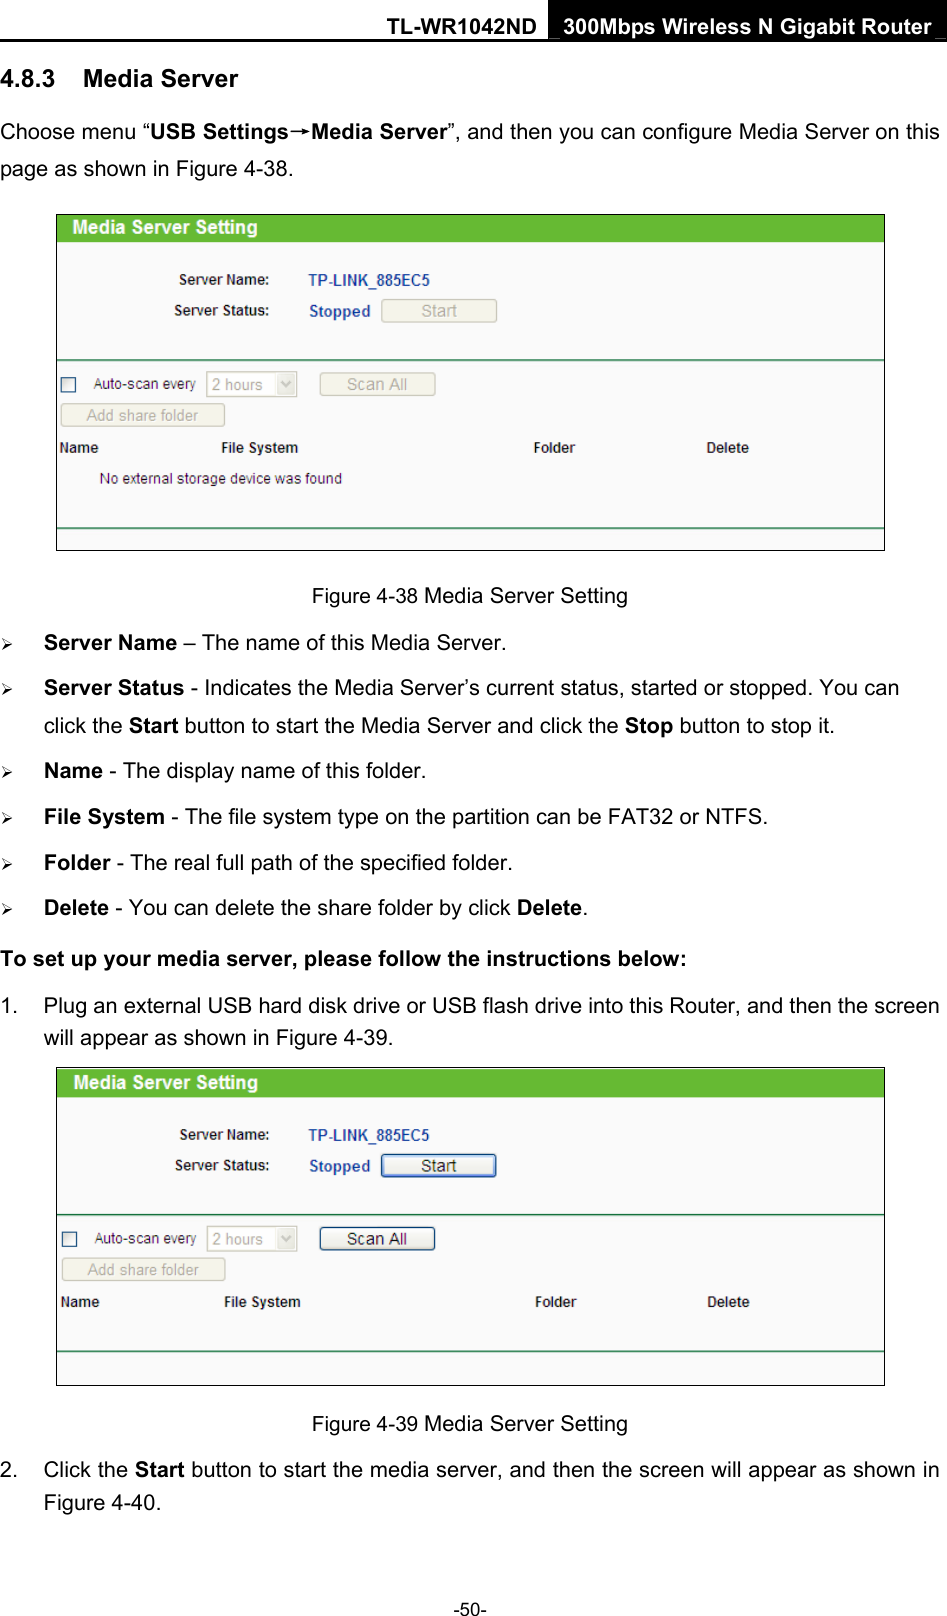 TL-WR1042ND 300Mbps Wireless N Gigabit Router -50- 4.8.3  Media Server Choose menu “USB Settings→Media Server”, and then you can configure Media Server on this page as shown in Figure 4-38.  Figure 4-38 Media Server Setting ¾ Server Name – The name of this Media Server. ¾ Server Status - Indicates the Media Server’s current status, started or stopped. You can click the Start button to start the Media Server and click the Stop button to stop it.     ¾ Name - The display name of this folder.   ¾ File System - The file system type on the partition can be FAT32 or NTFS.   ¾ Folder - The real full path of the specified folder.   ¾ Delete - You can delete the share folder by click Delete. To set up your media server, please follow the instructions below:   1.  Plug an external USB hard disk drive or USB flash drive into this Router, and then the screen will appear as shown in Figure 4-39.  Figure 4-39 Media Server Setting 2. Click the Start button to start the media server, and then the screen will appear as shown in Figure 4-40. 